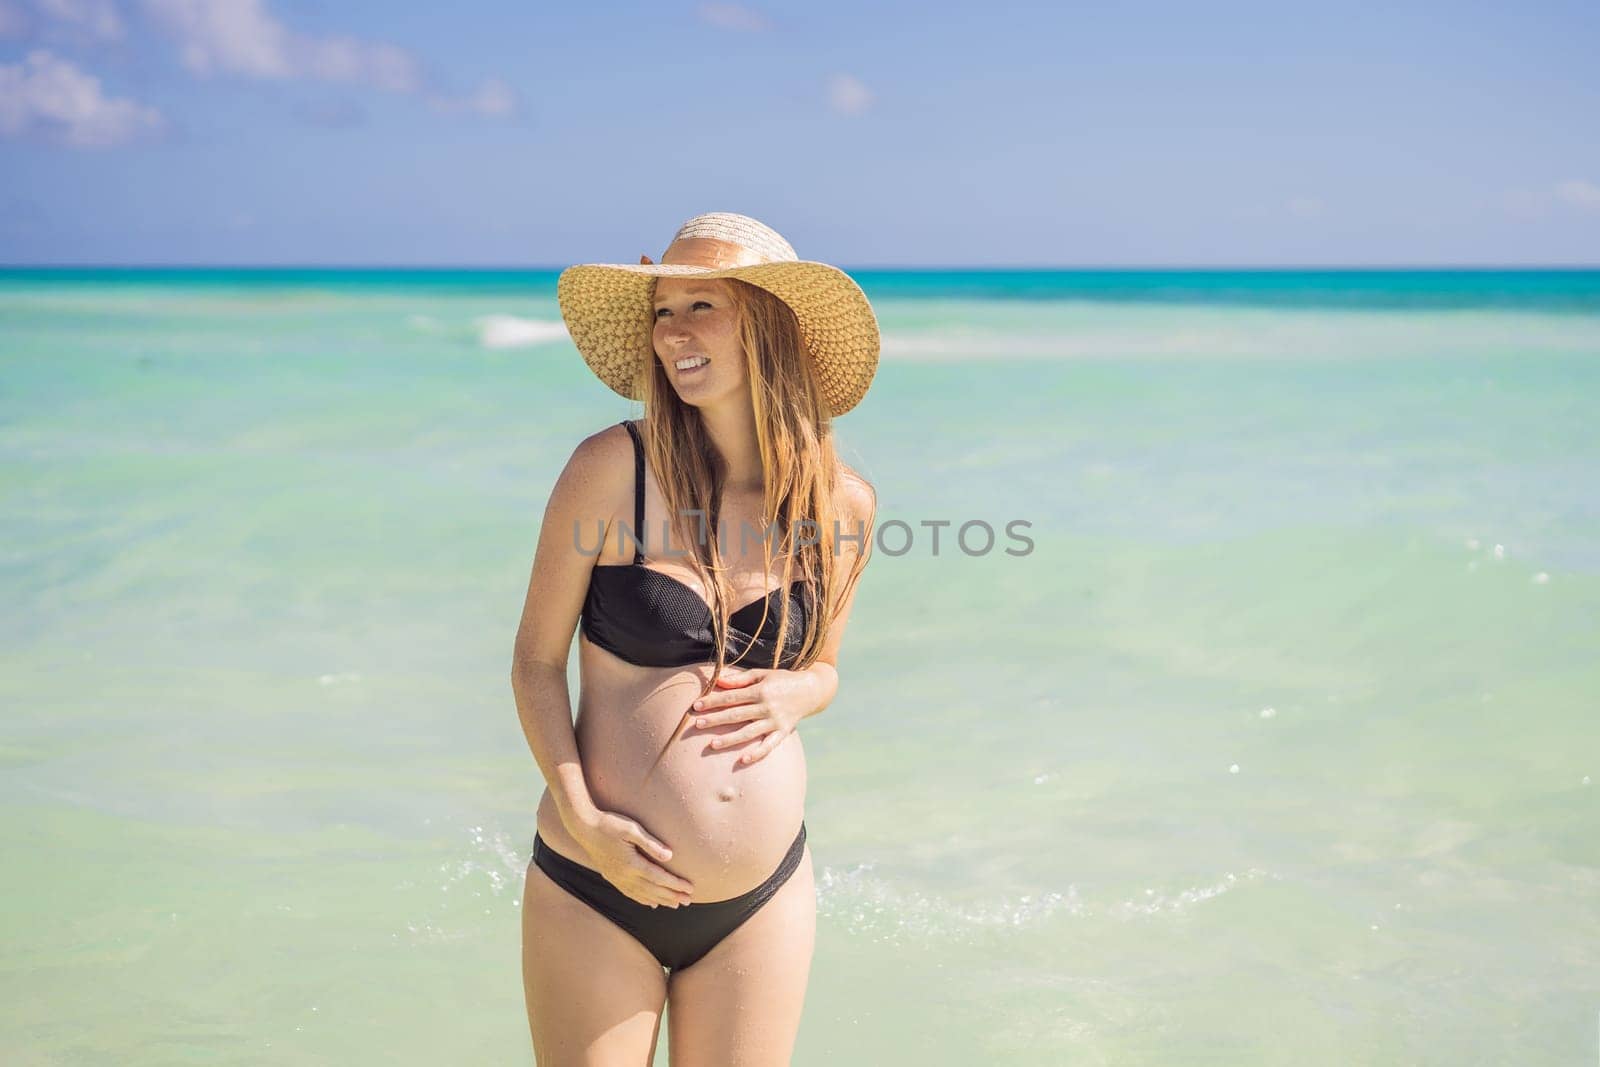 Radiant and expecting, a pregnant woman stands on a pristine snow-white tropical beach, celebrating the miracle of life against a backdrop of natural beauty.